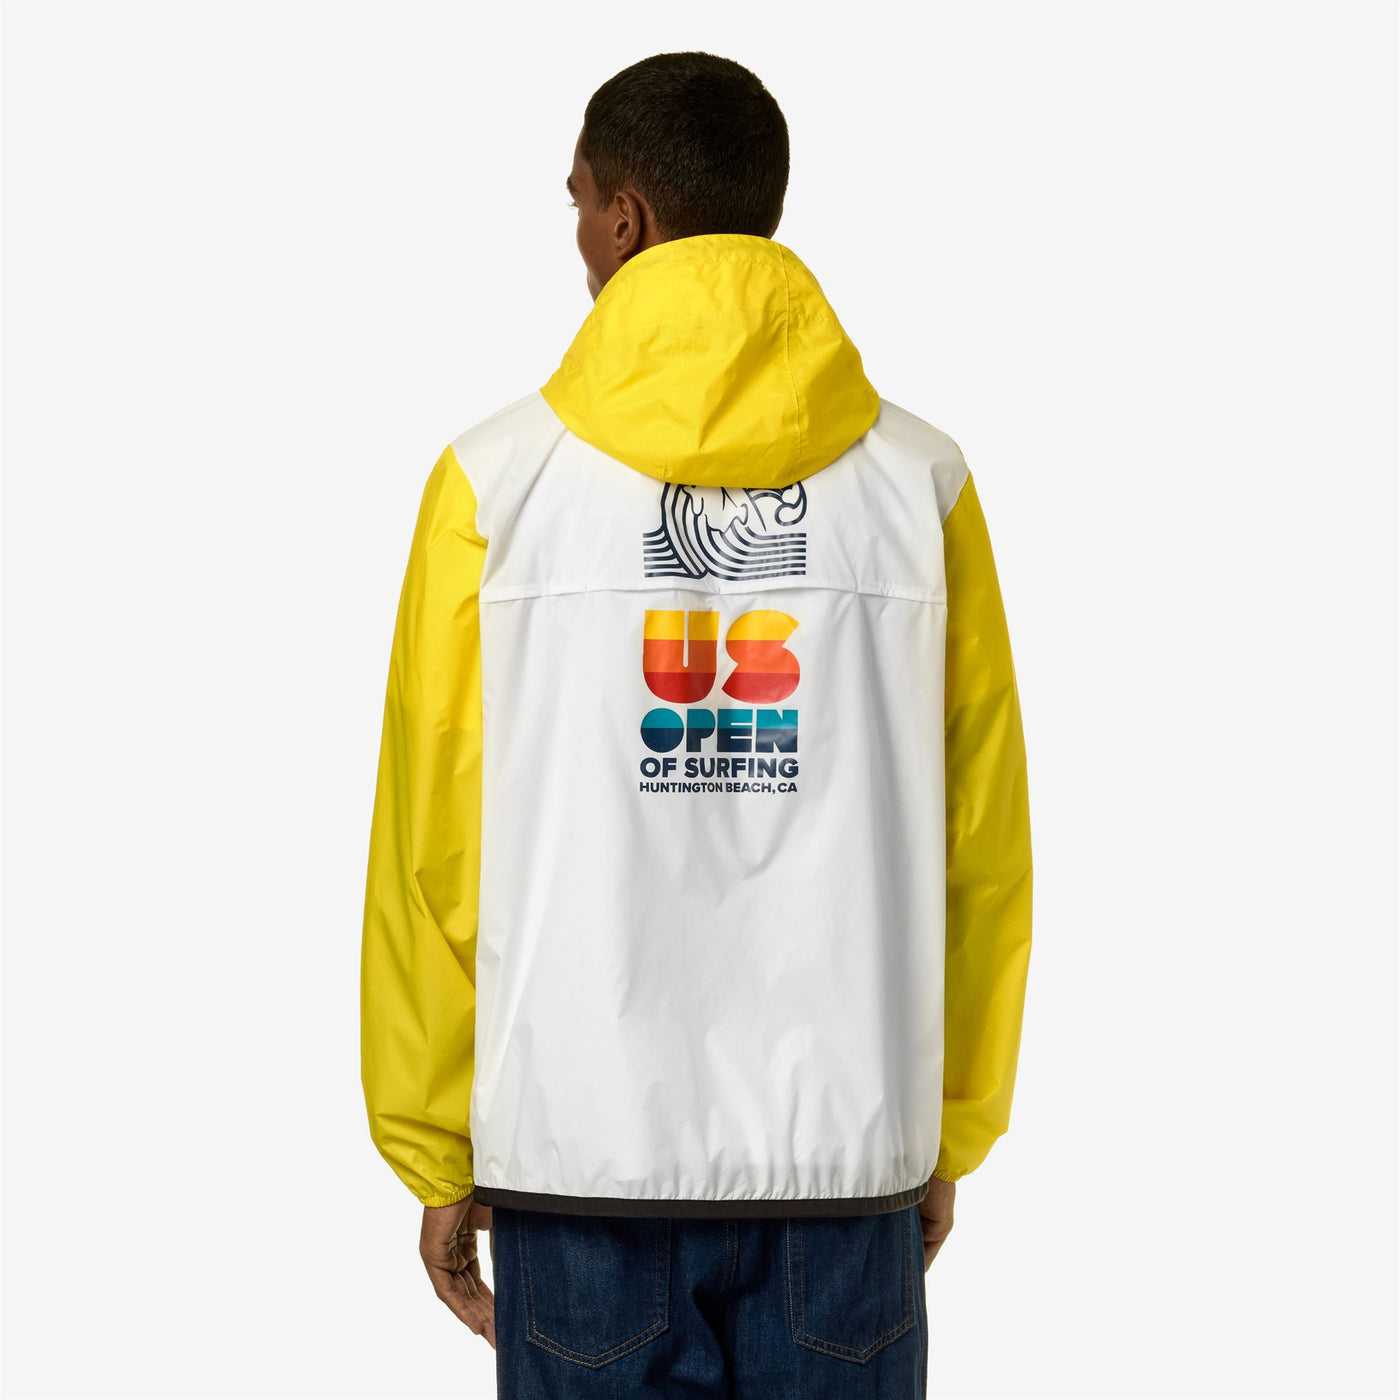 Jackets Unisex LE VRAI 3.0 CLAUDE CDG OPEN US OF SURFING BICOLOR Mid WHITE - YELLOW DK Dressed Front Double		